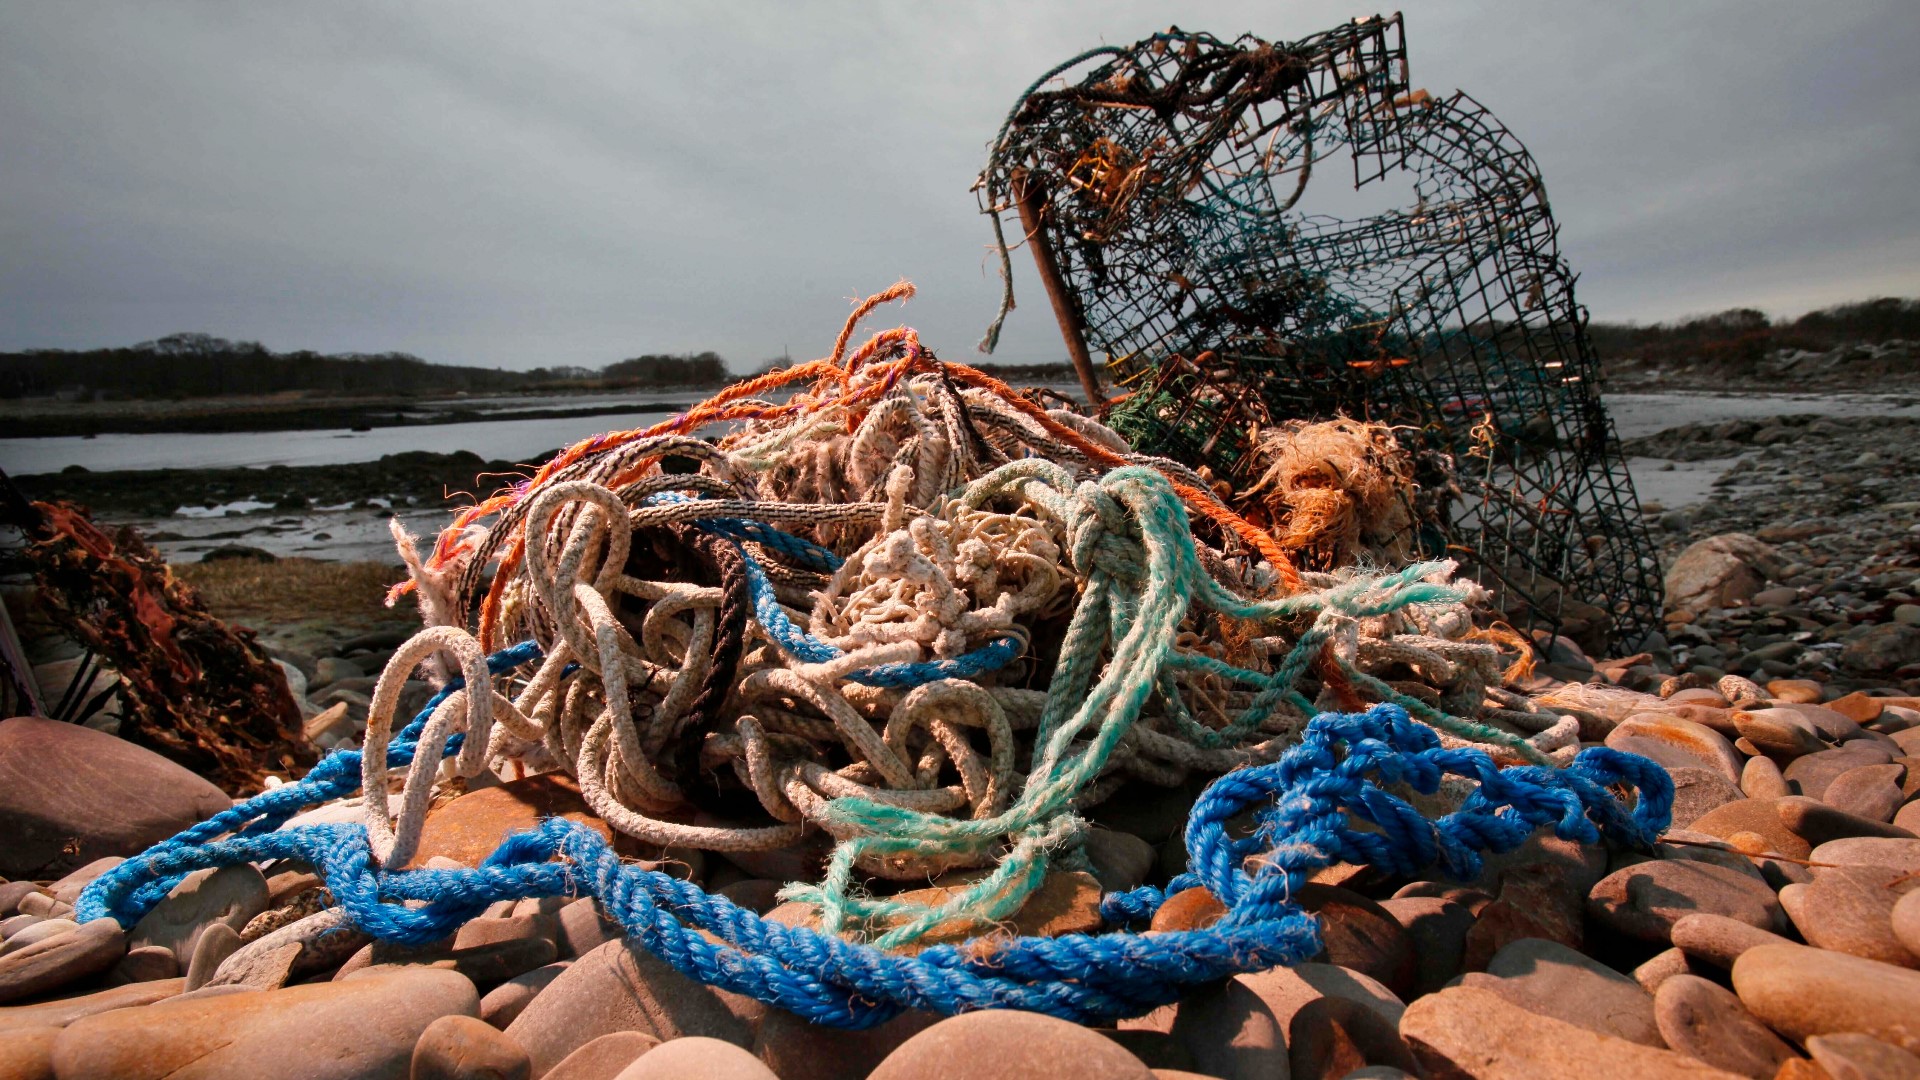 The proposed amendment would pause new regulations to the lobster industry for six years, which many fishermen say would lead to the industry's collapse.